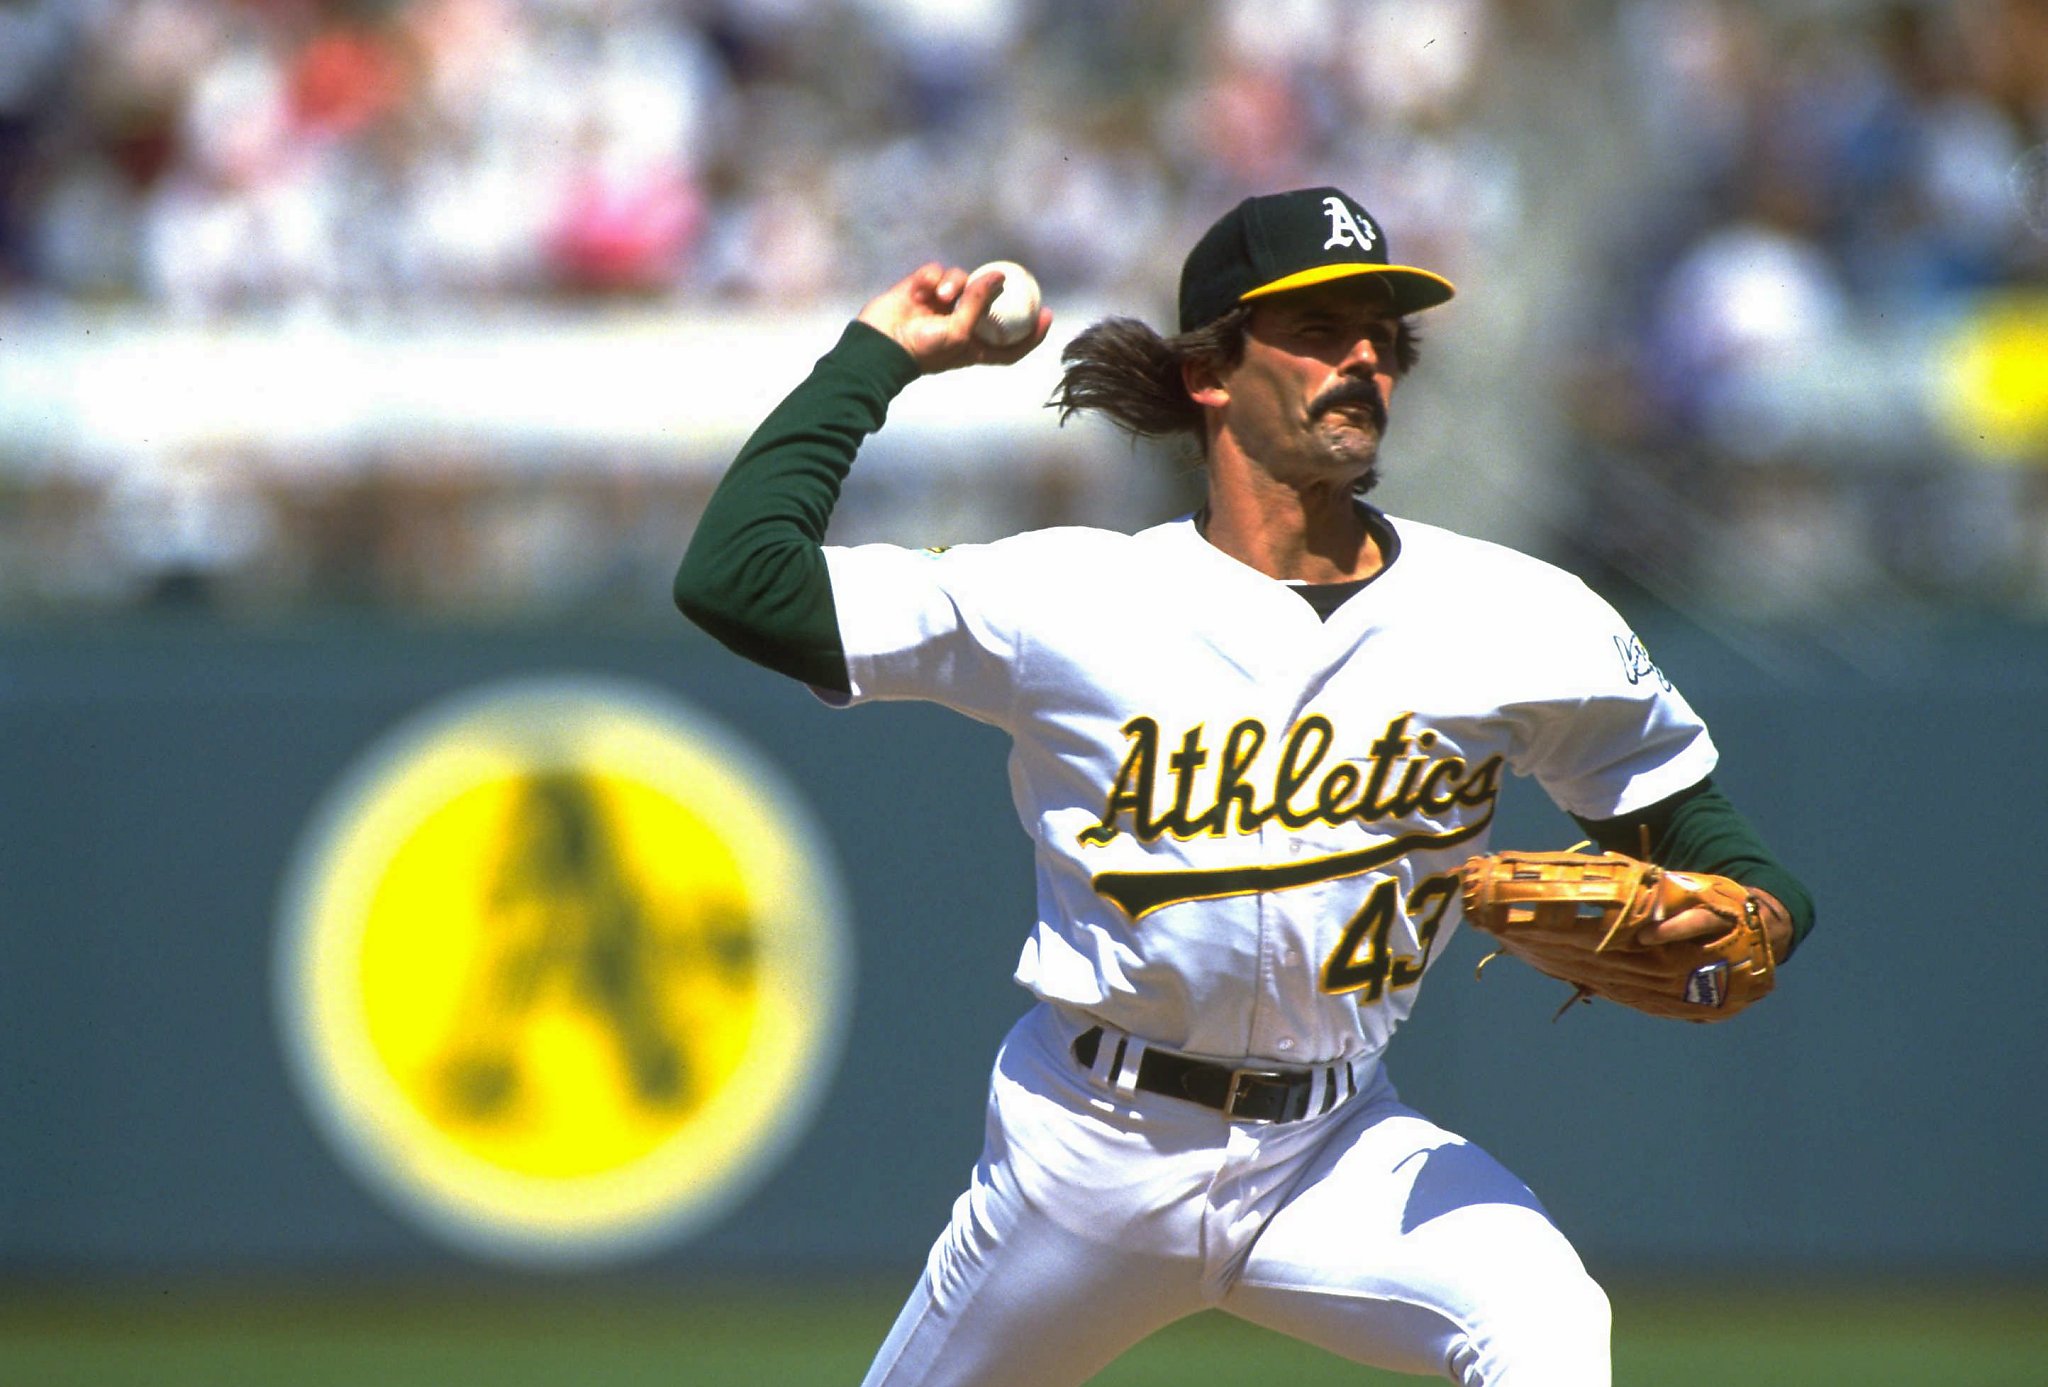 April 10, 1992: A's edge White Sox as Dennis Eckersley gets the save